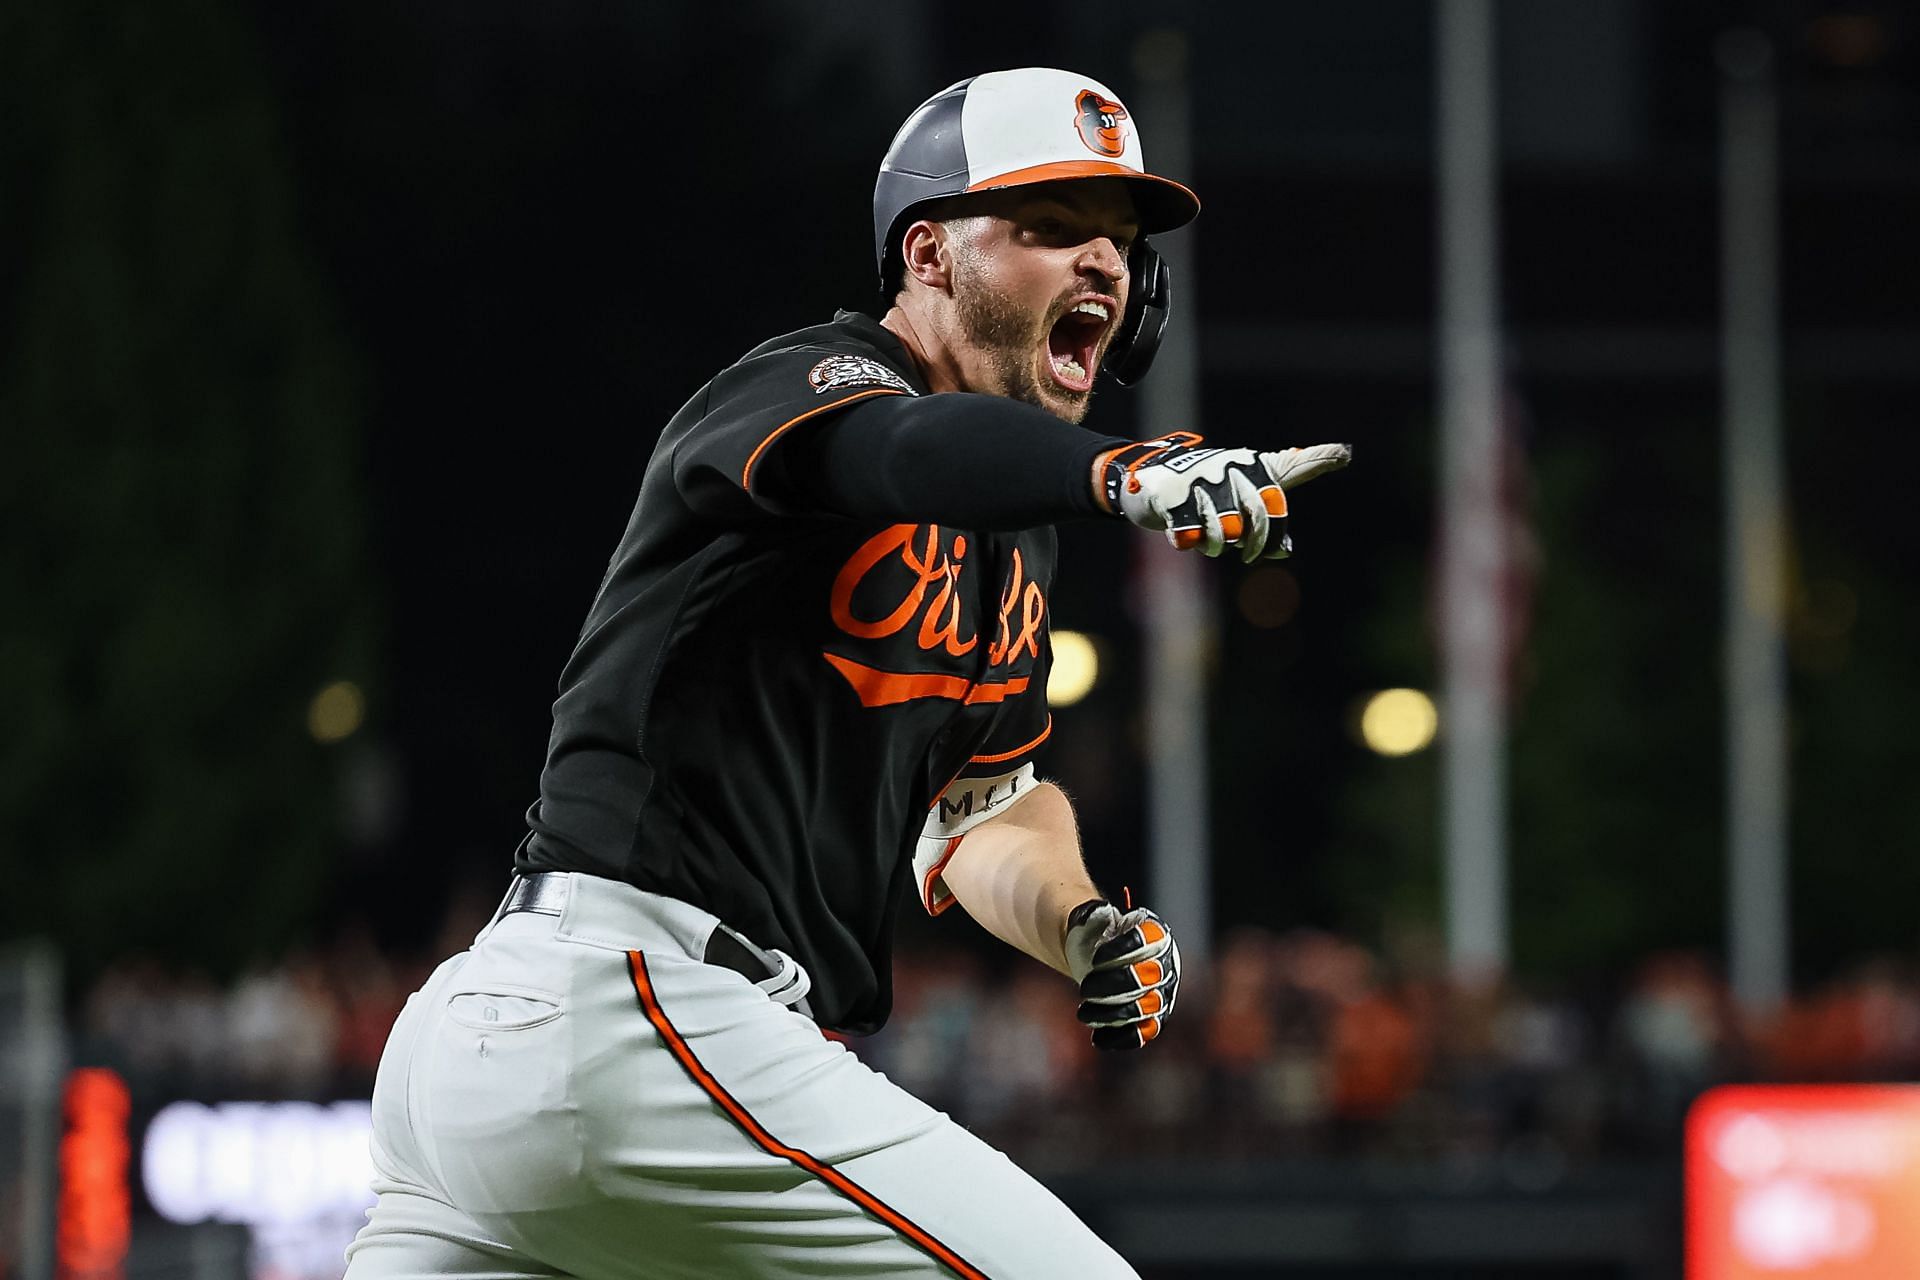 Trey Mancini, fiancee Sara Perlman say goodbye to Baltimore: 'It really was  a dream come true for me to play for the Orioles